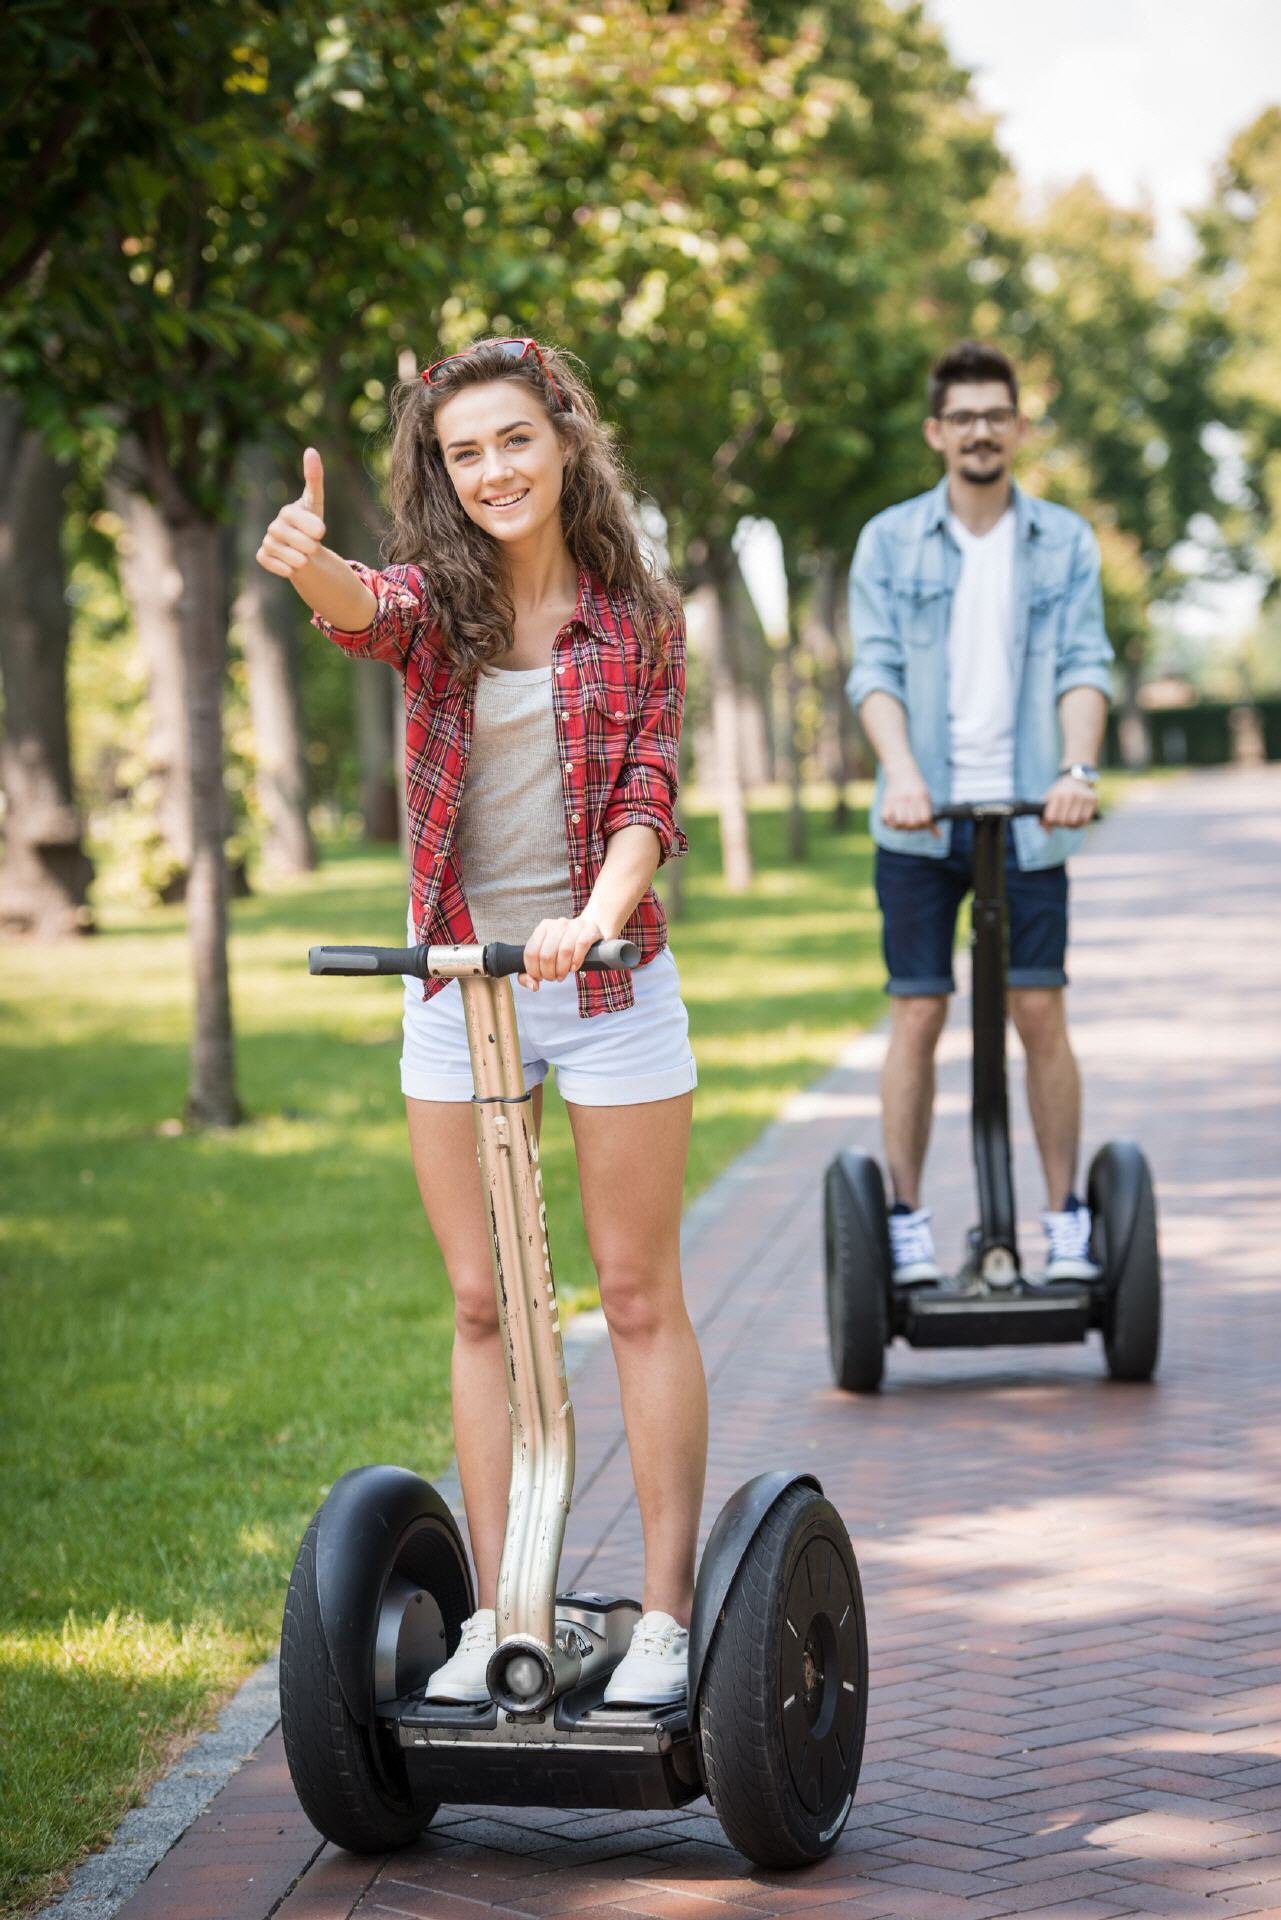 How Much Do Segways Cost?